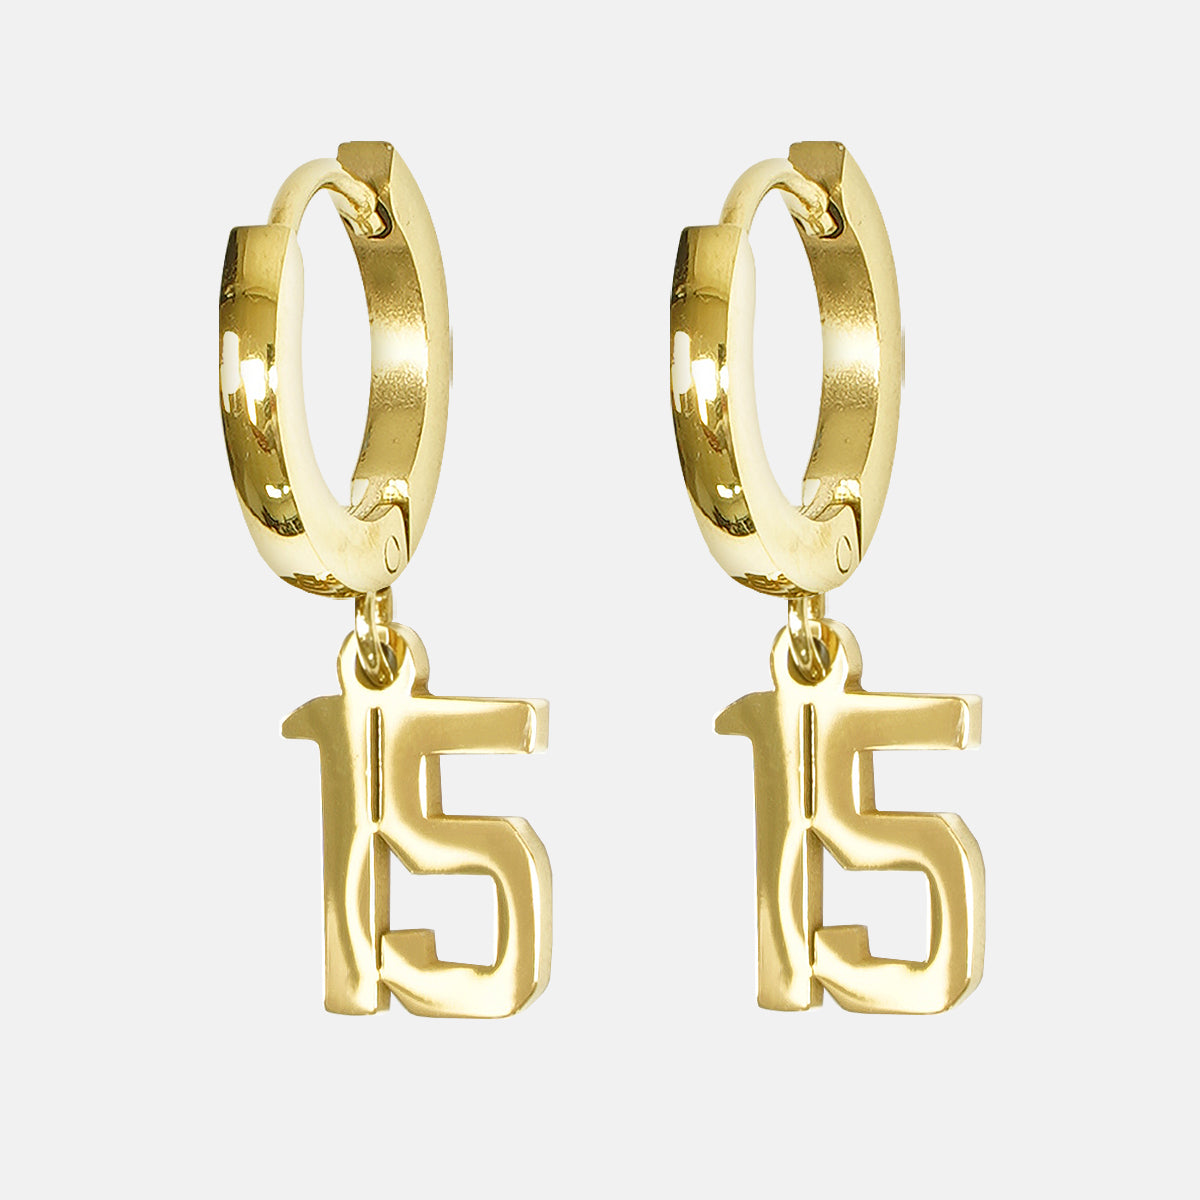 15 Number Earring - Gold Plated Stainless Steel